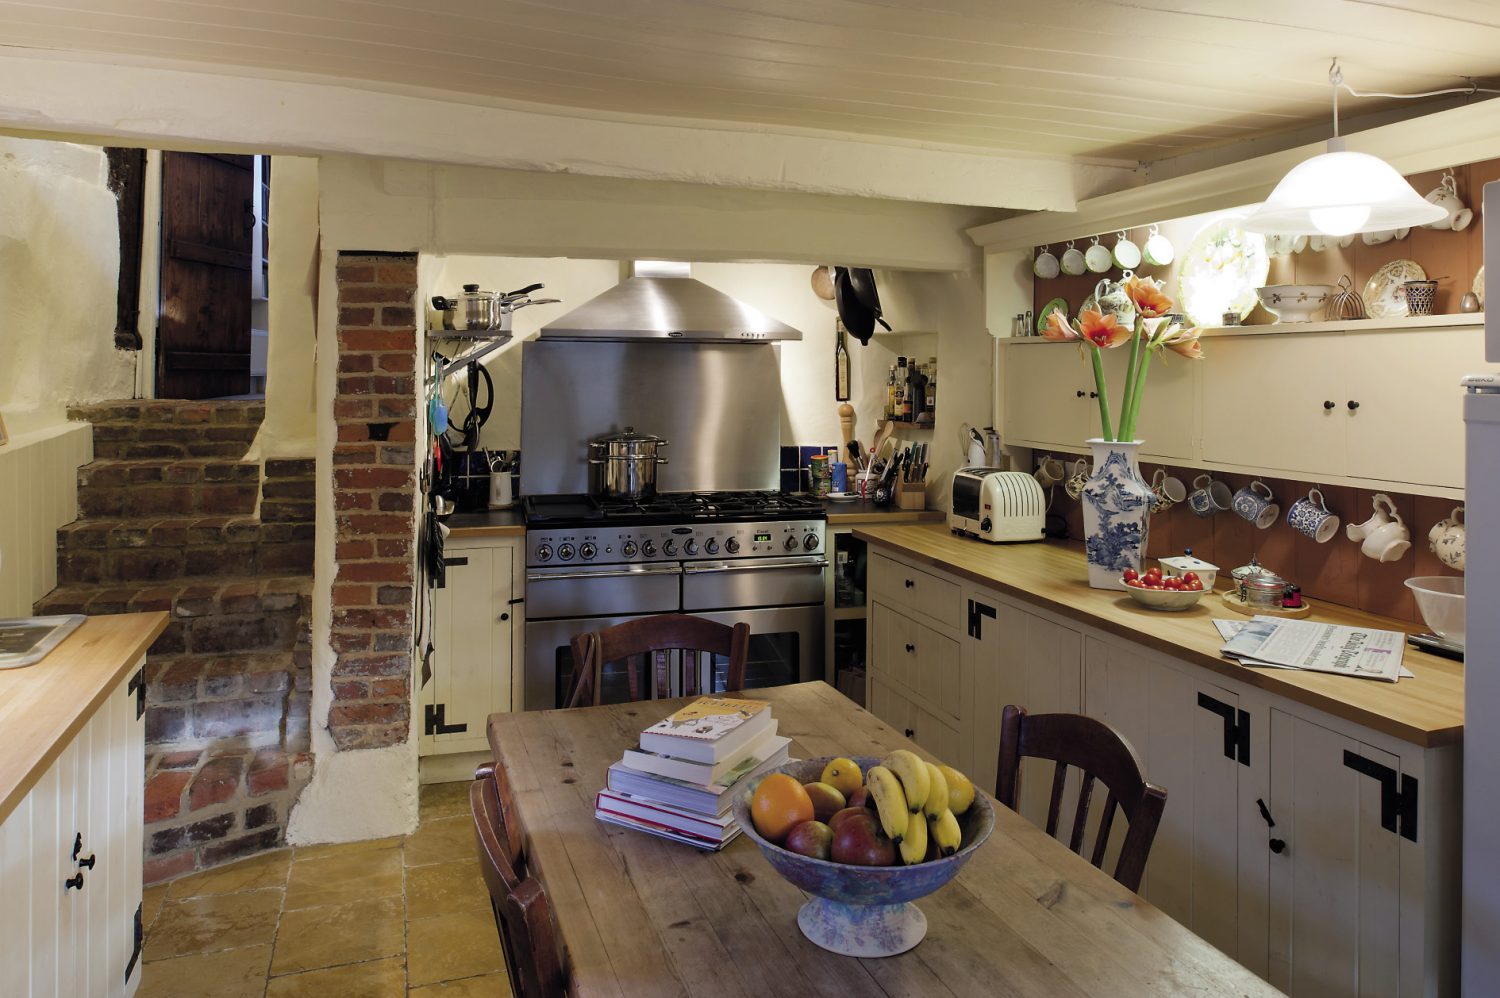 Stone steps lead down from the dining room into the kitchen, which was once a scullery. It has been updated with a huge stainless steel range, but has kept its old country charm, with a polished stone floor and scrubbed pine table